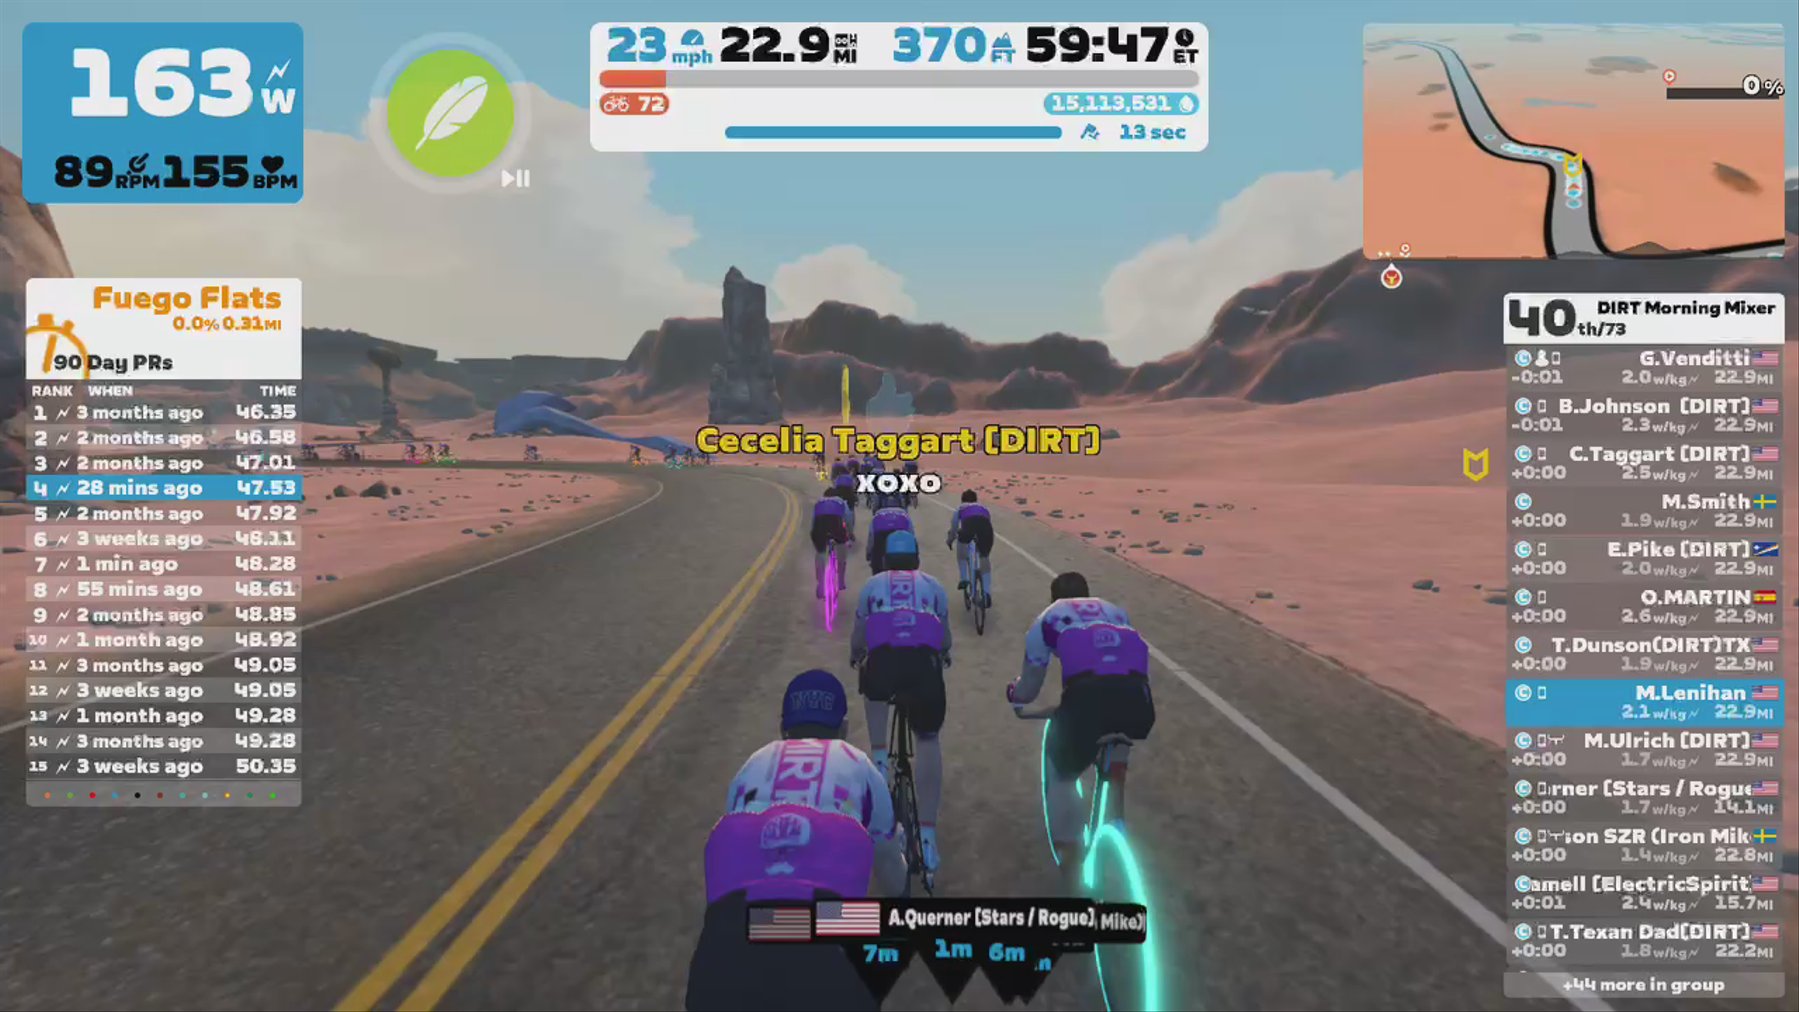 Zwift - Group Ride: DIRT Morning Mixer (C) on Tick Tock in Watopia